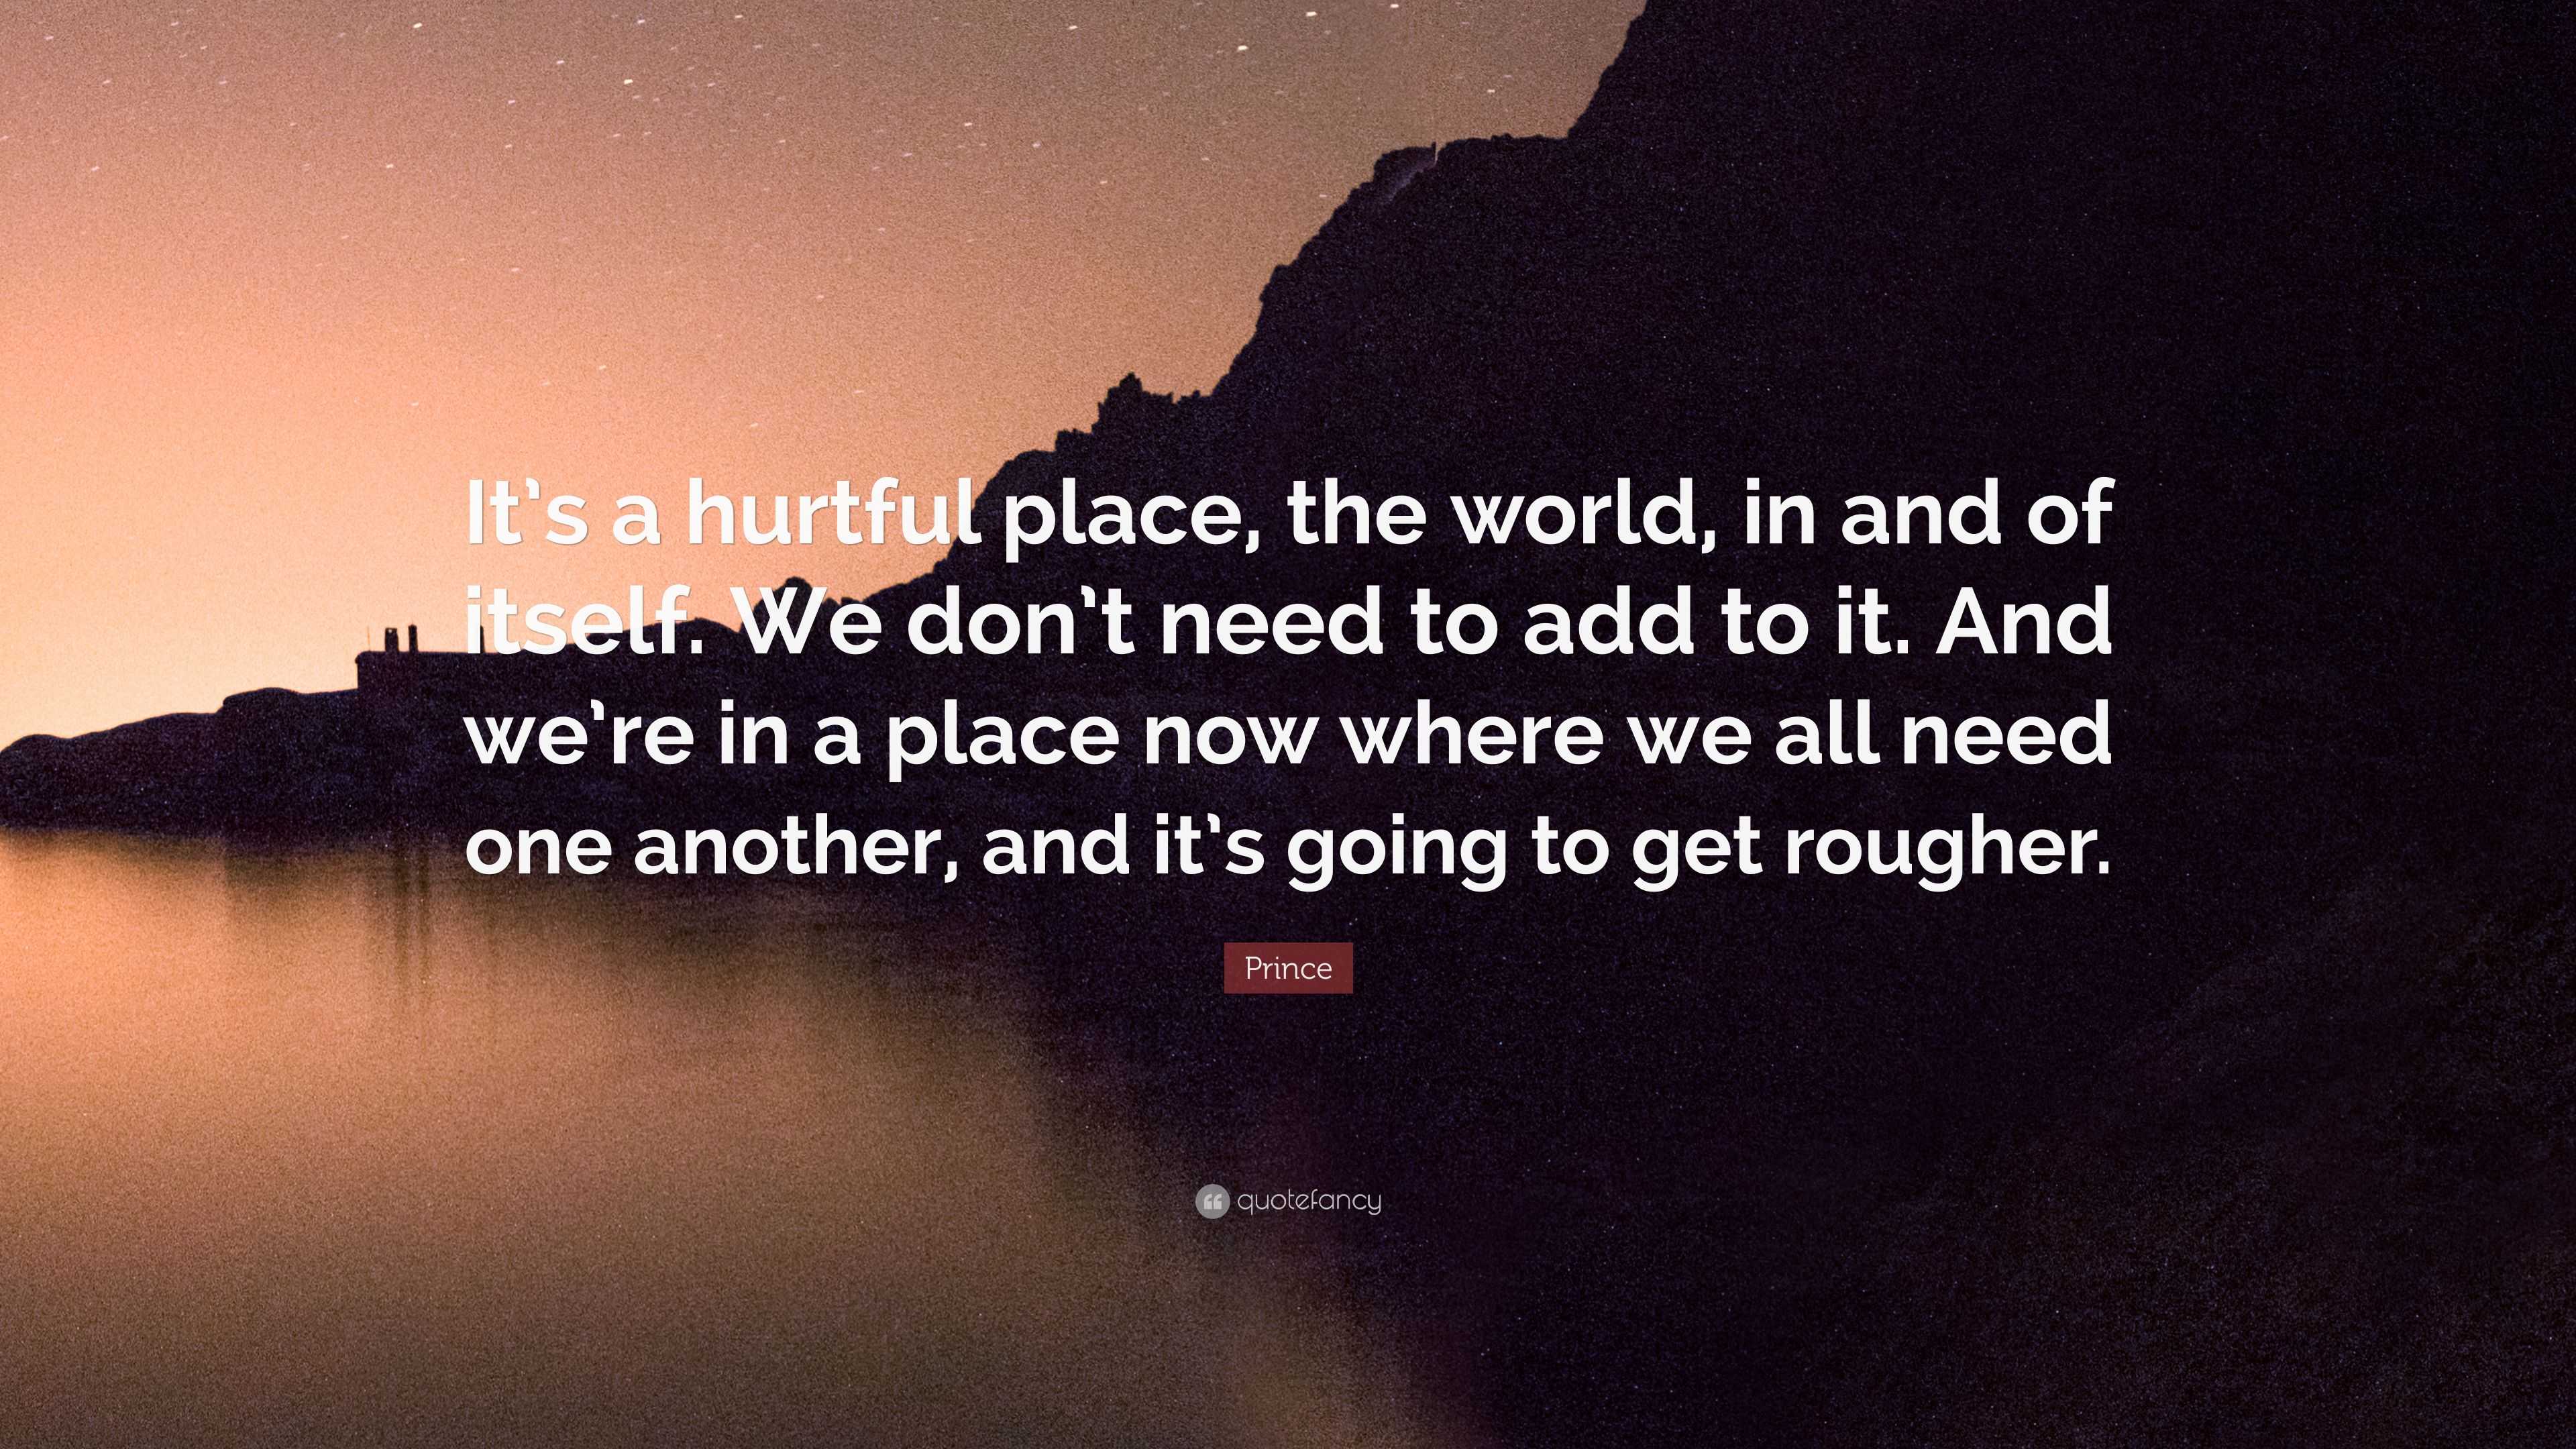 Prince Quote “It s a hurtful place the world in and of itself